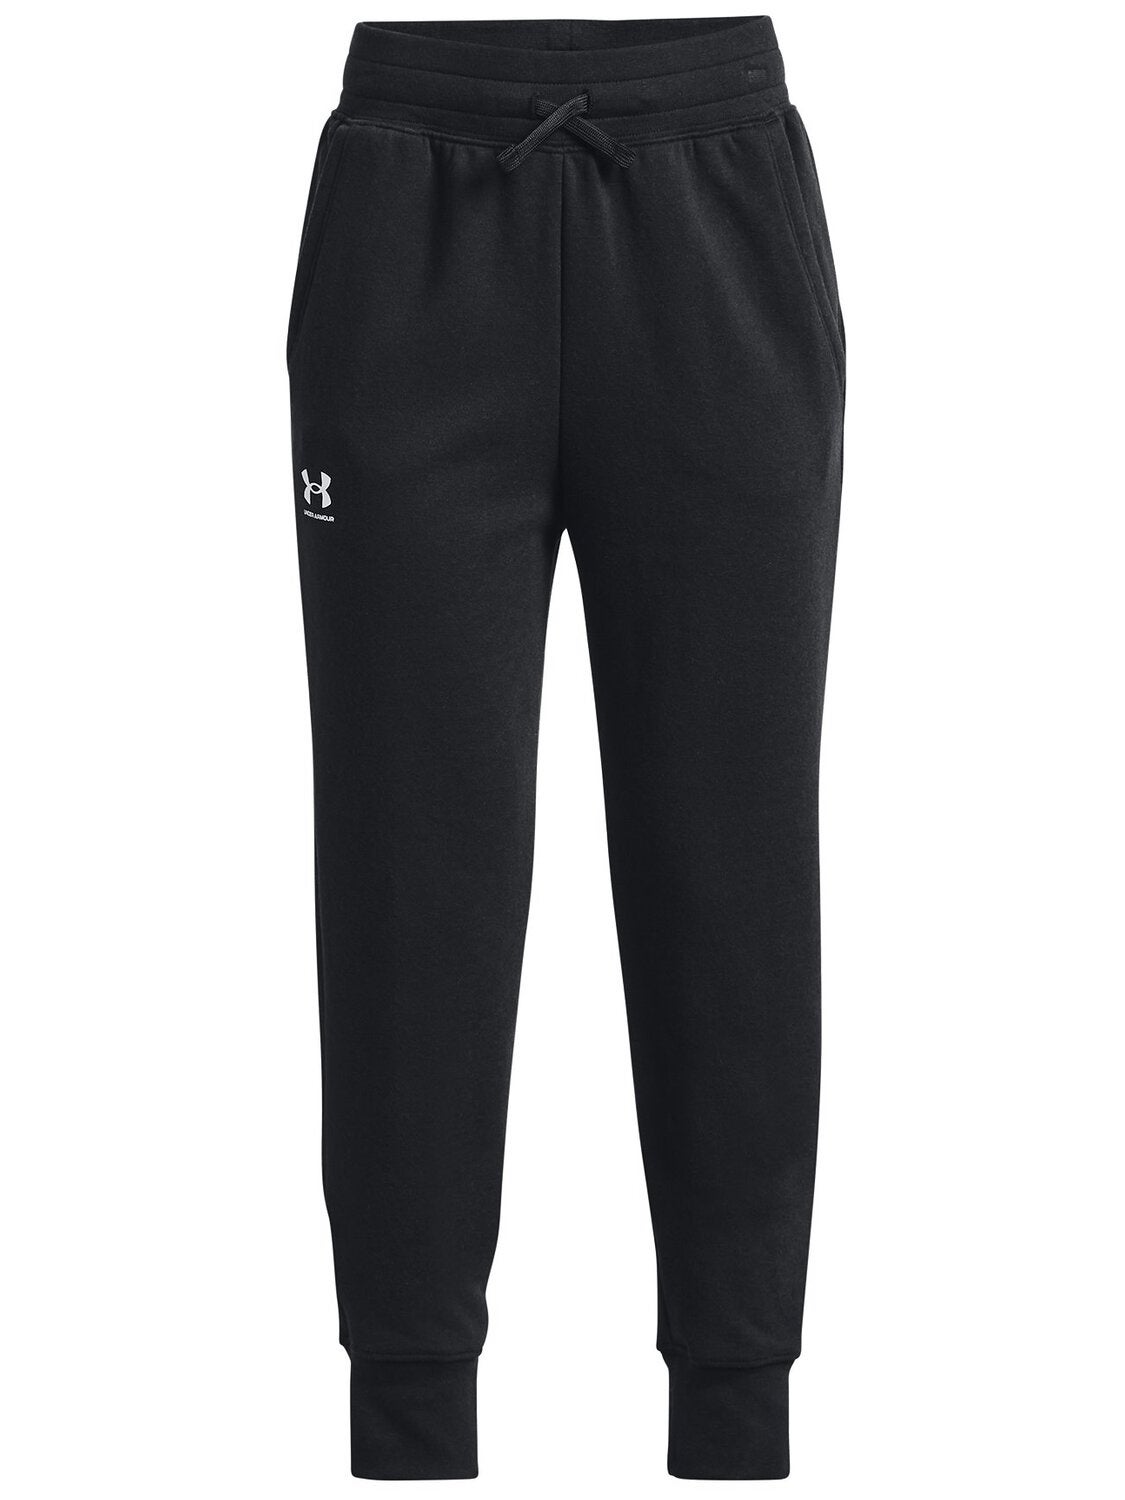 Under Armour Girls Rival Jogger 